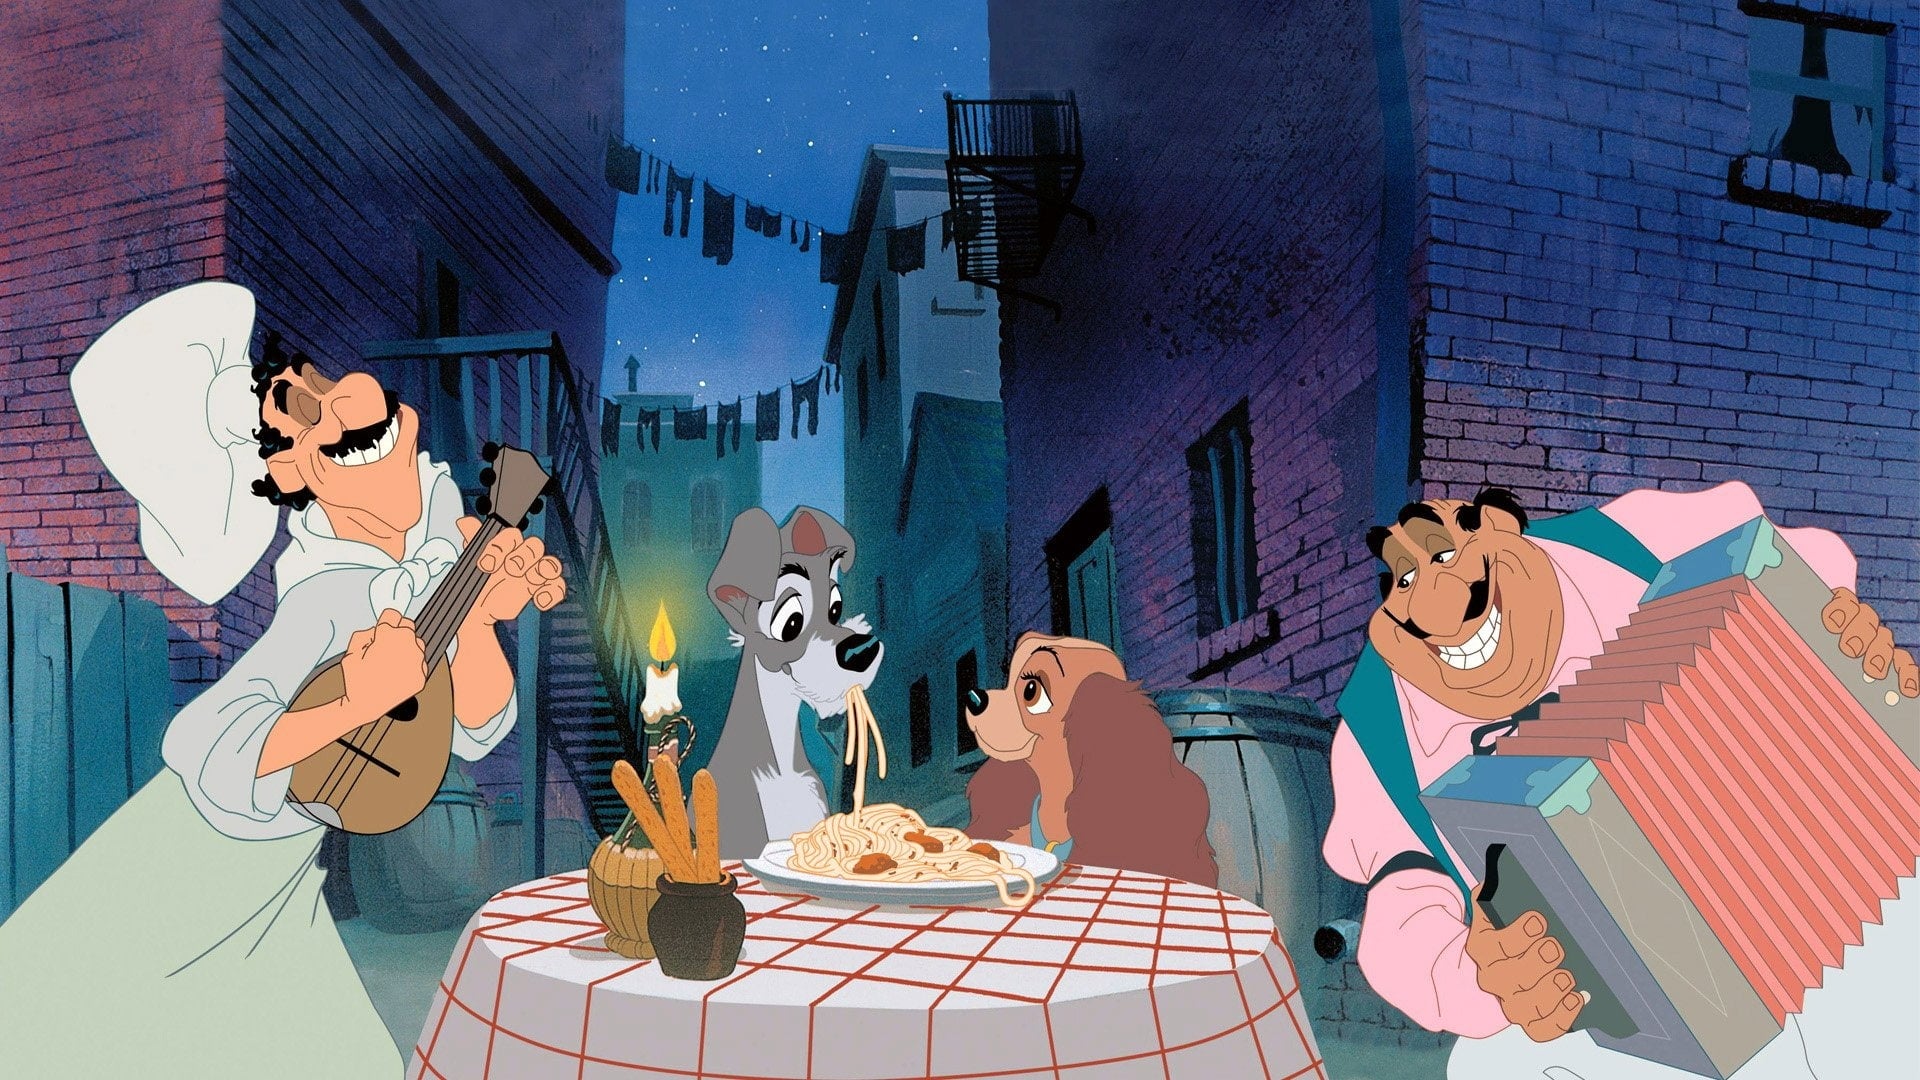 Backgrounds and walpapers Lady and the Tramp